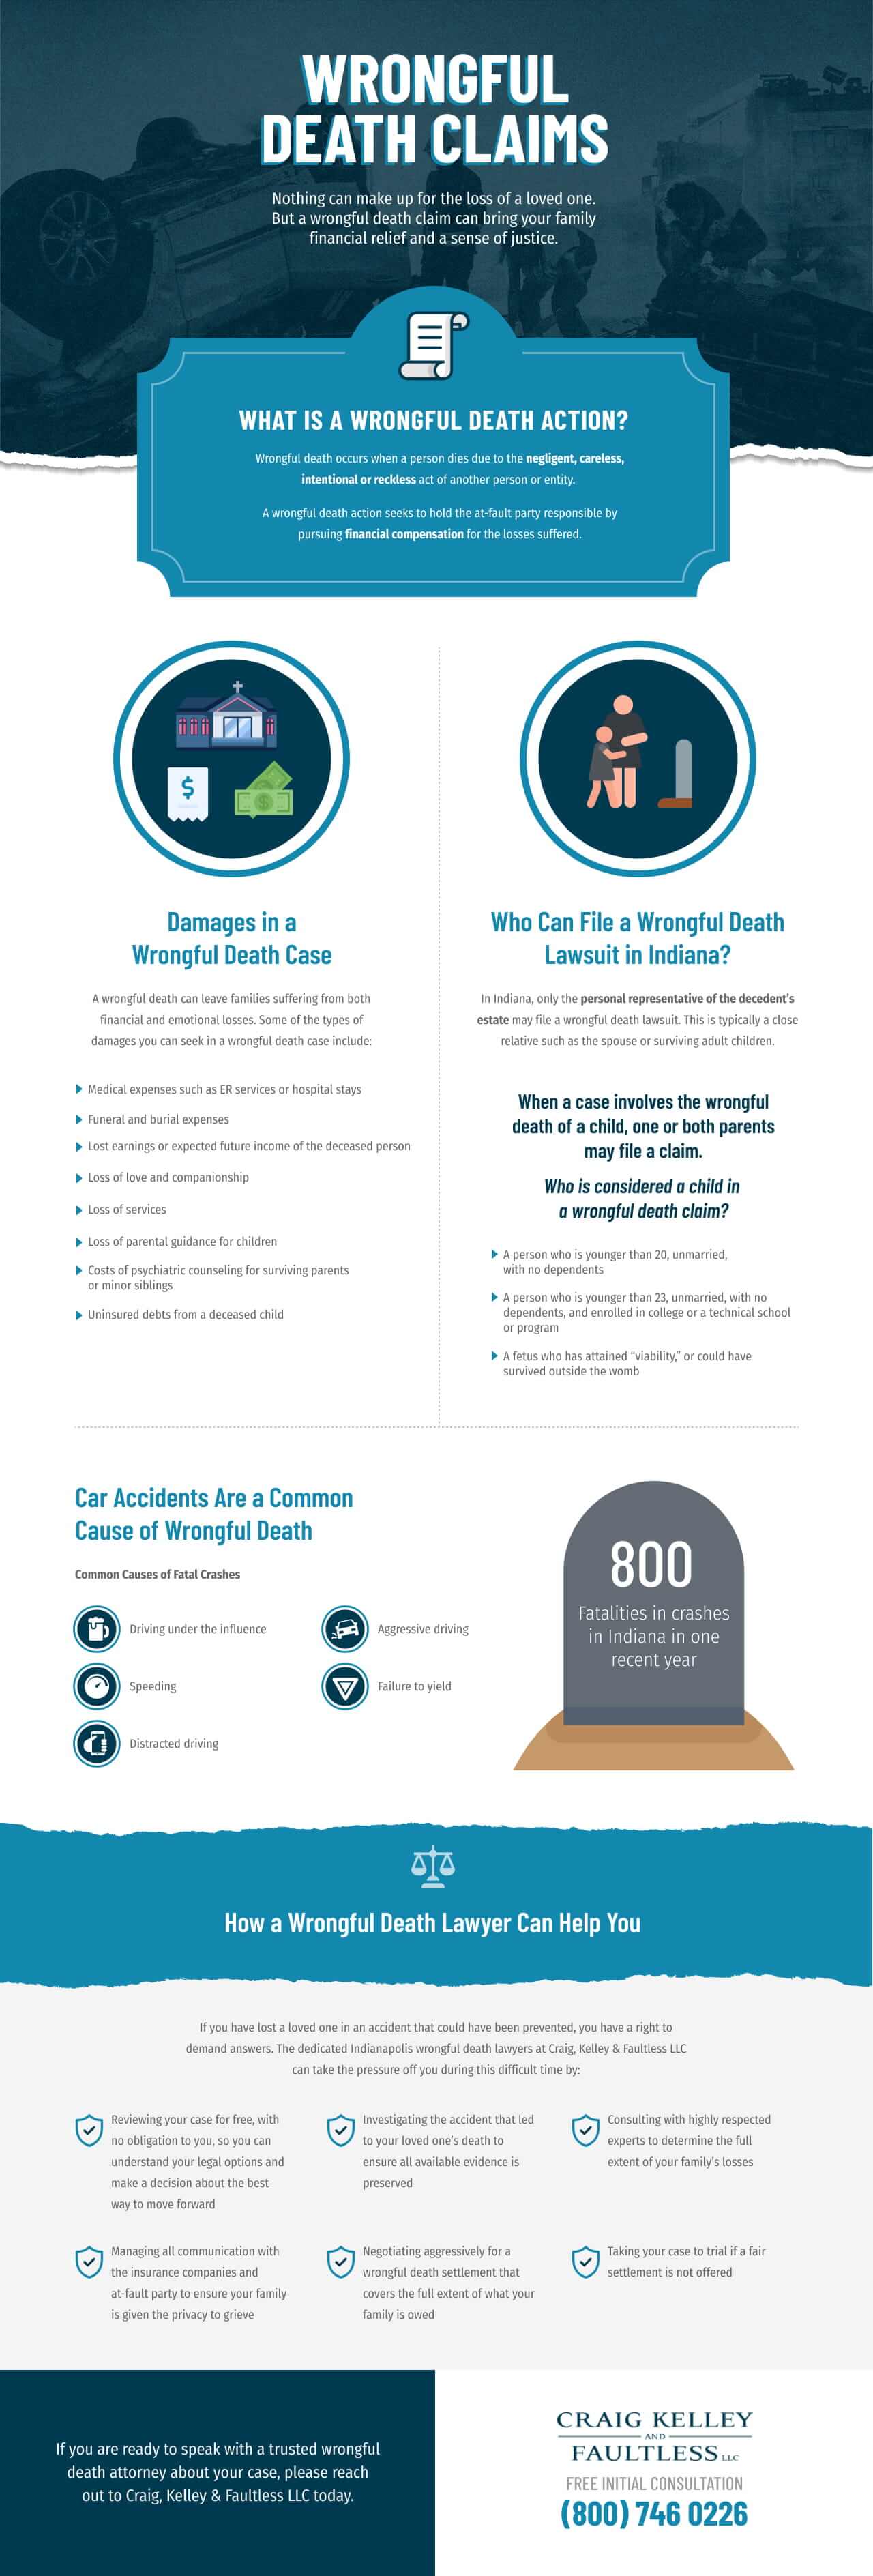 Infographics on Wrongful Death Claims - By Craig, Kelley & Faultless LLC, Indianapolis Personal Injury Lawyers